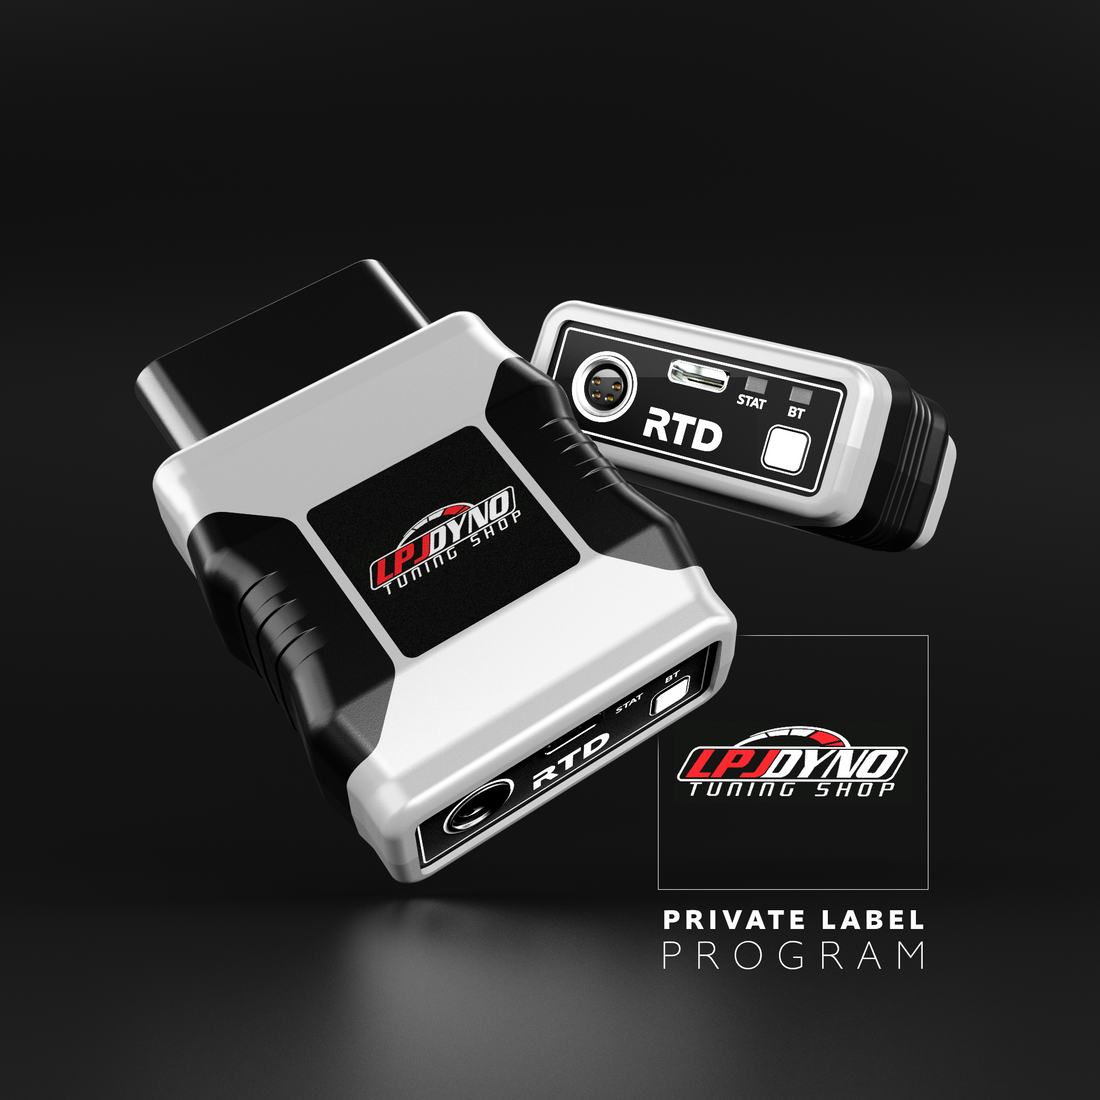 Our New HP Tuners Private Lable Program